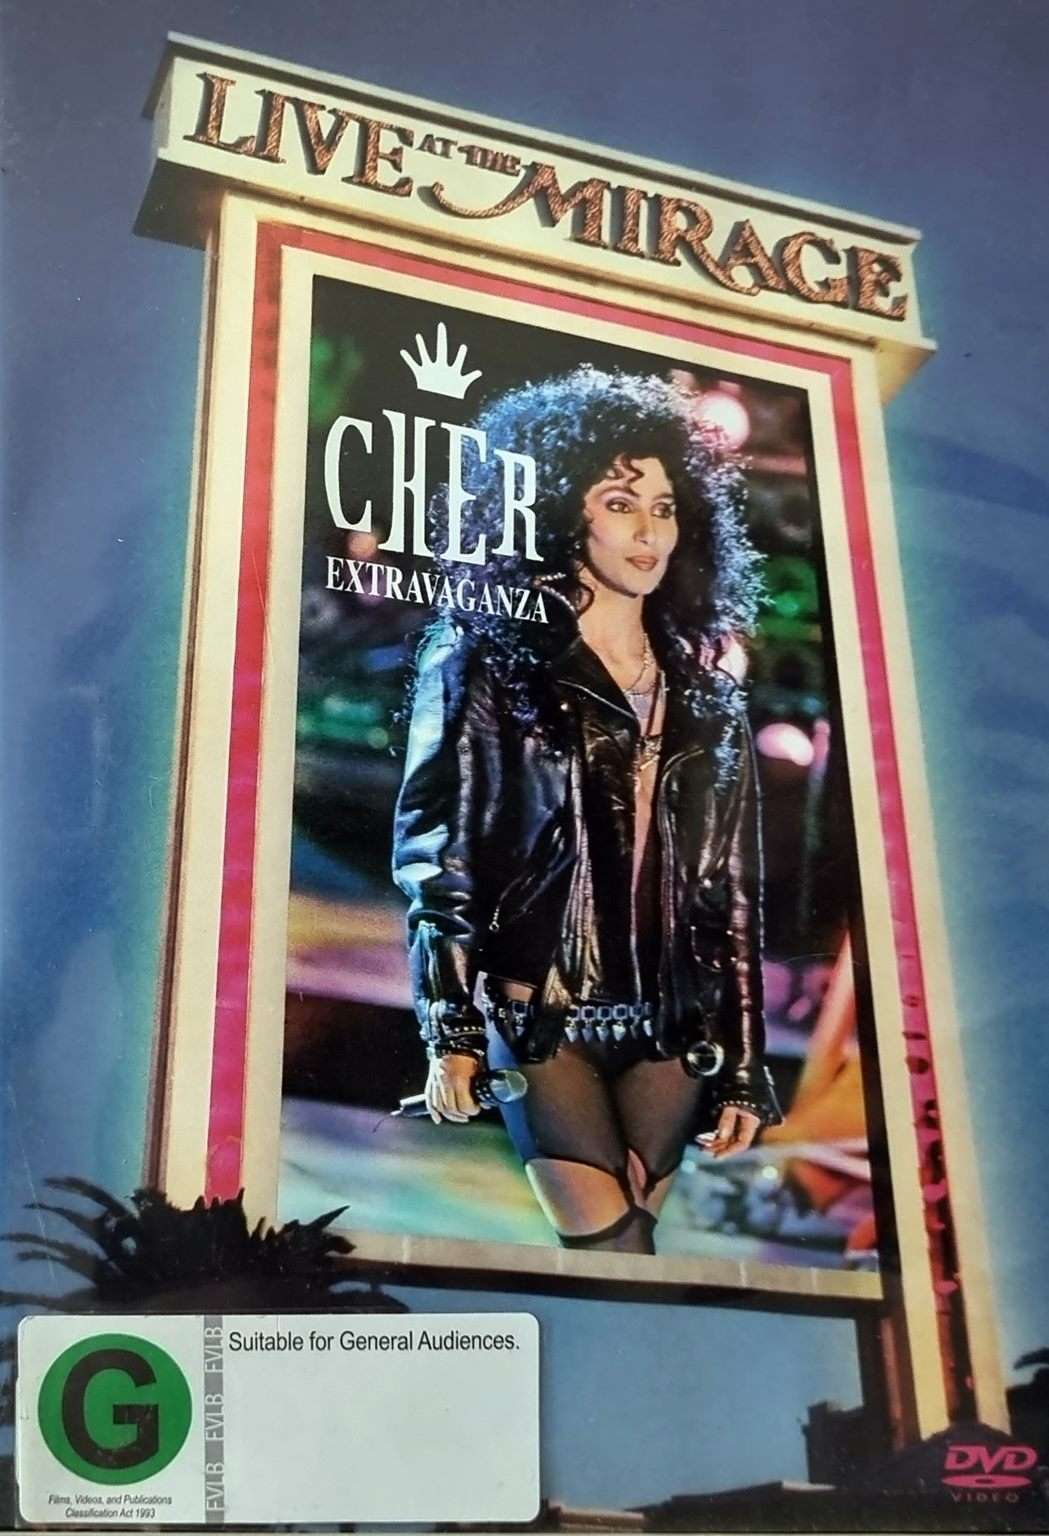 Cher Extravaganza - Live at the Mirage